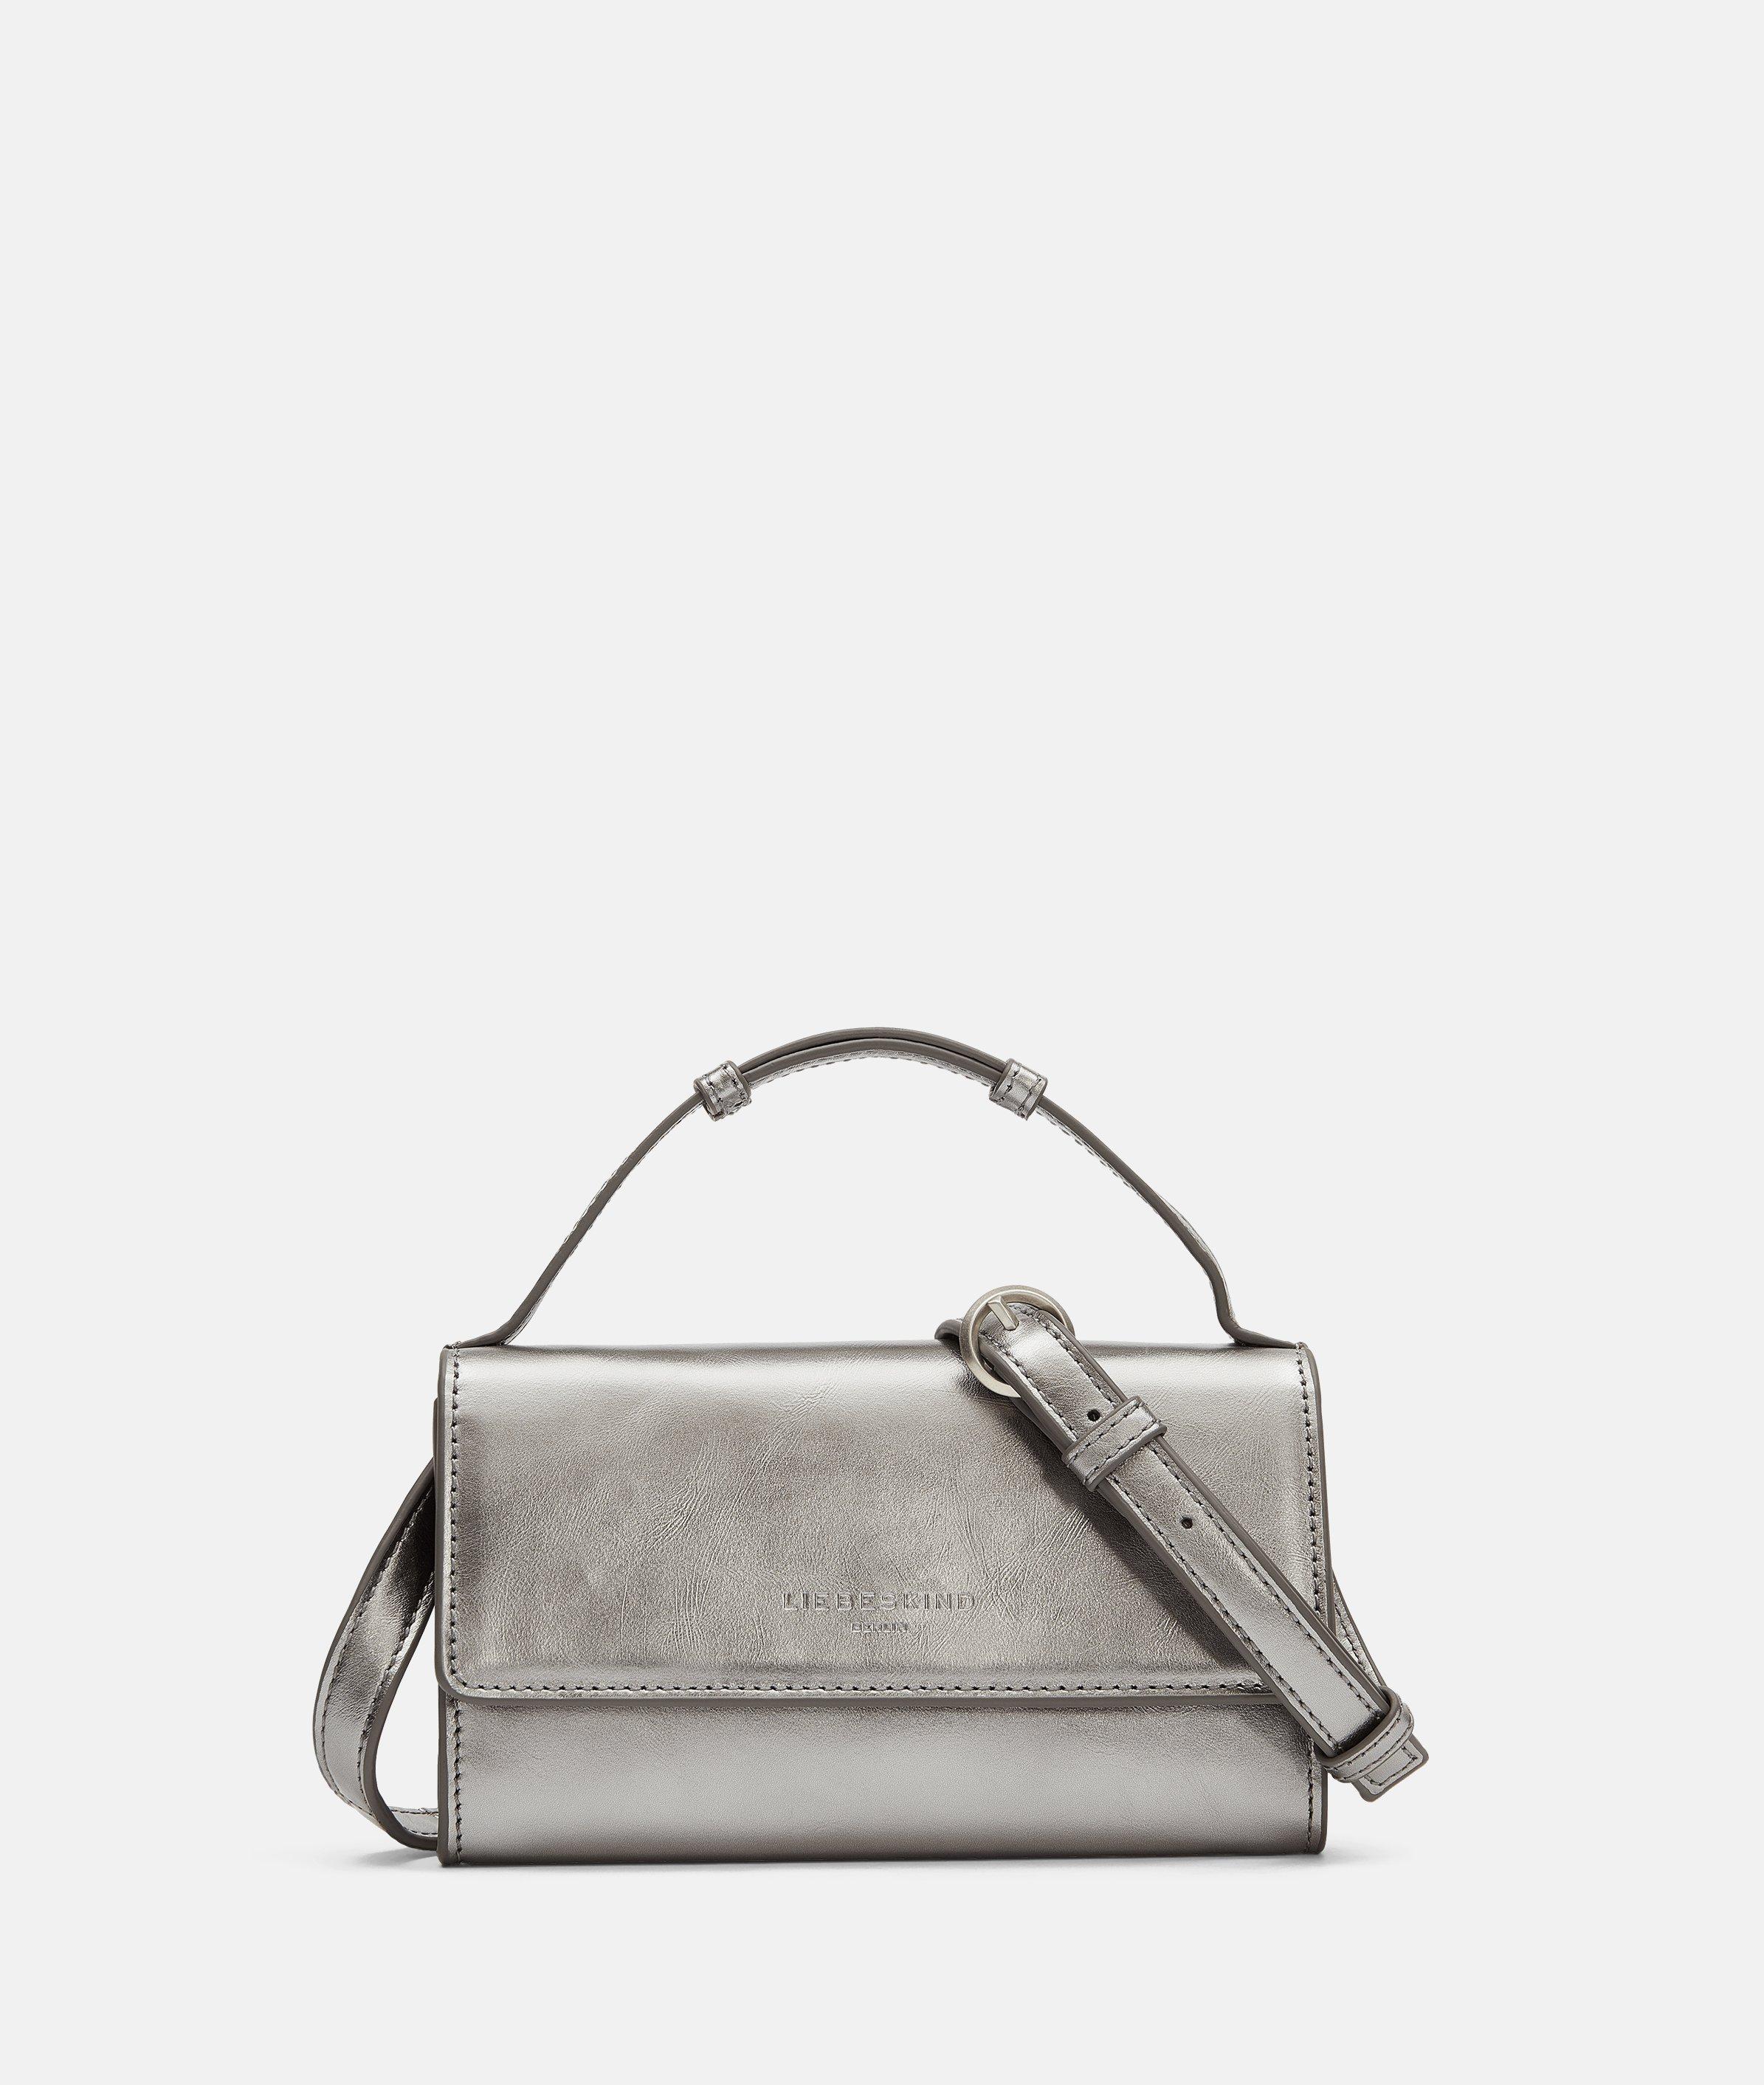 Cross-body bag made of leather Liebeskind Berlin